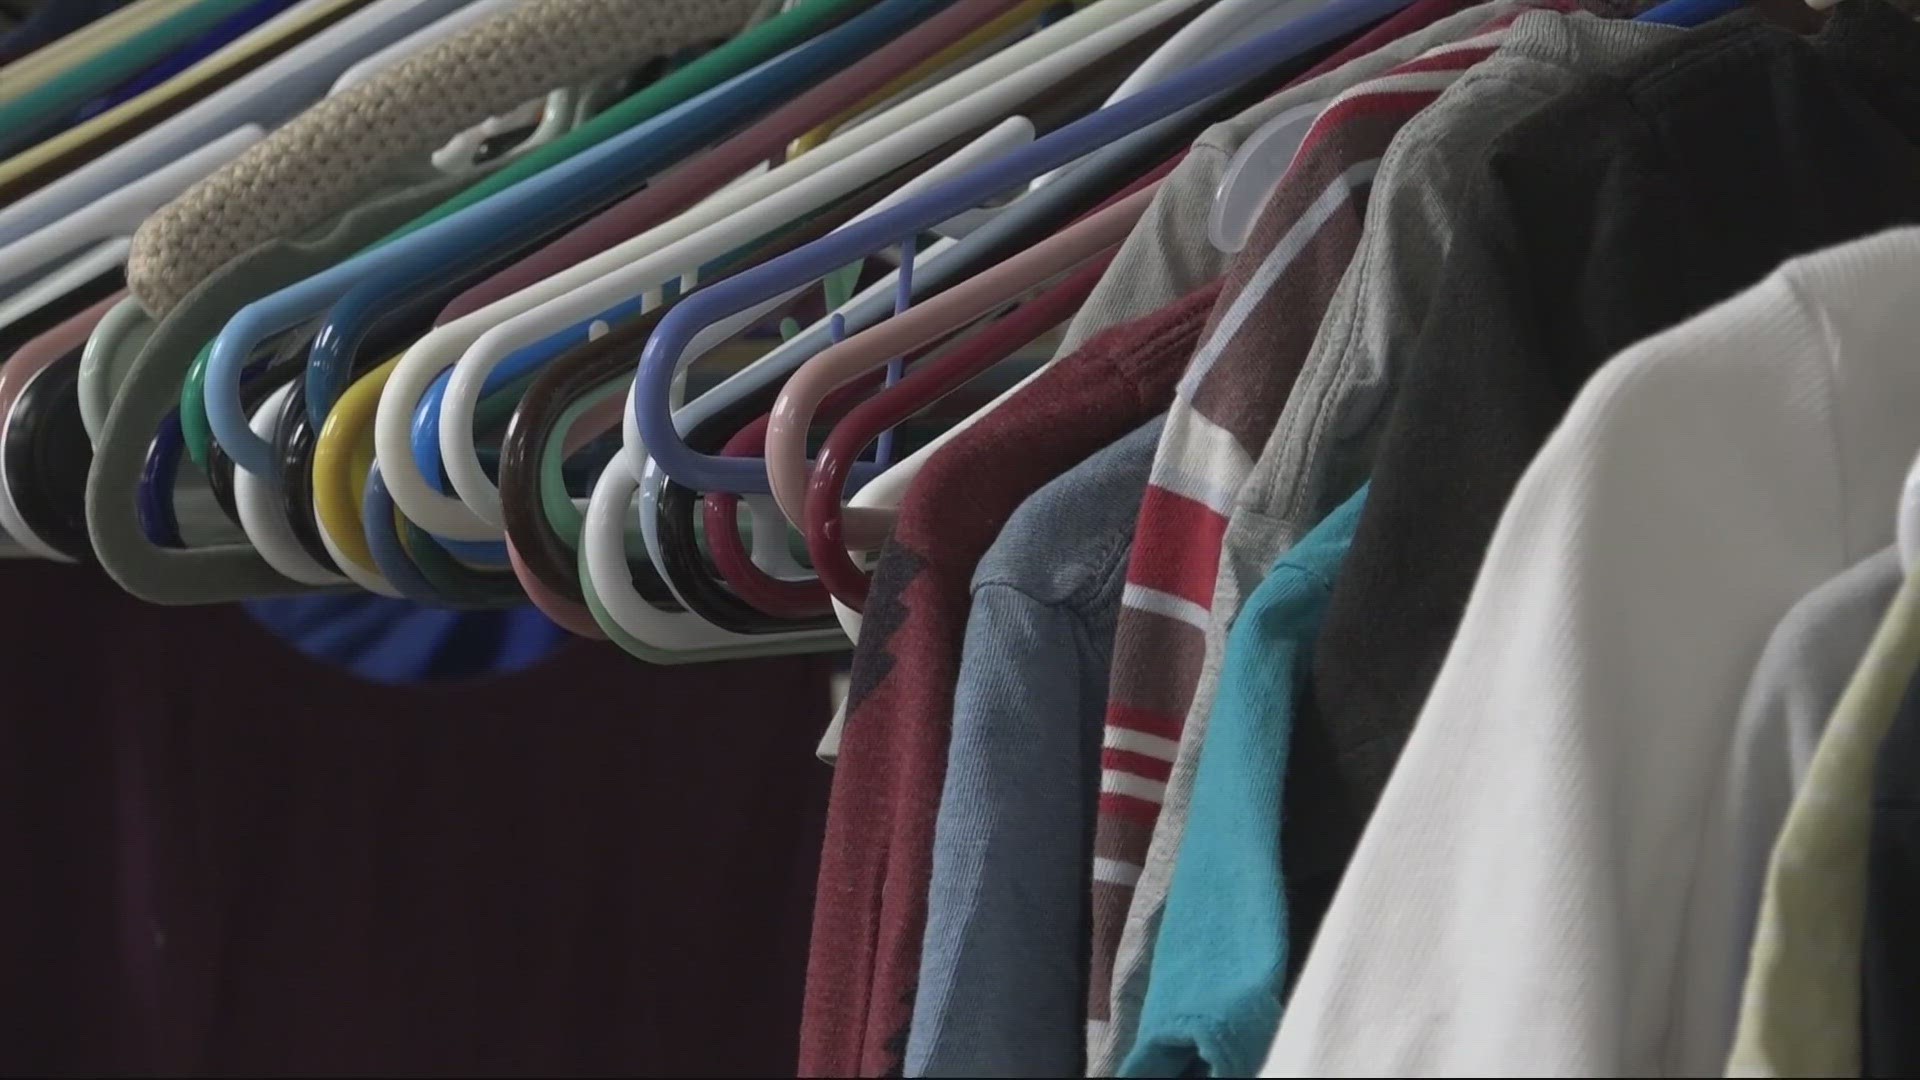 As cold weather nears, Oregon clothing banks are in need of winter coats.